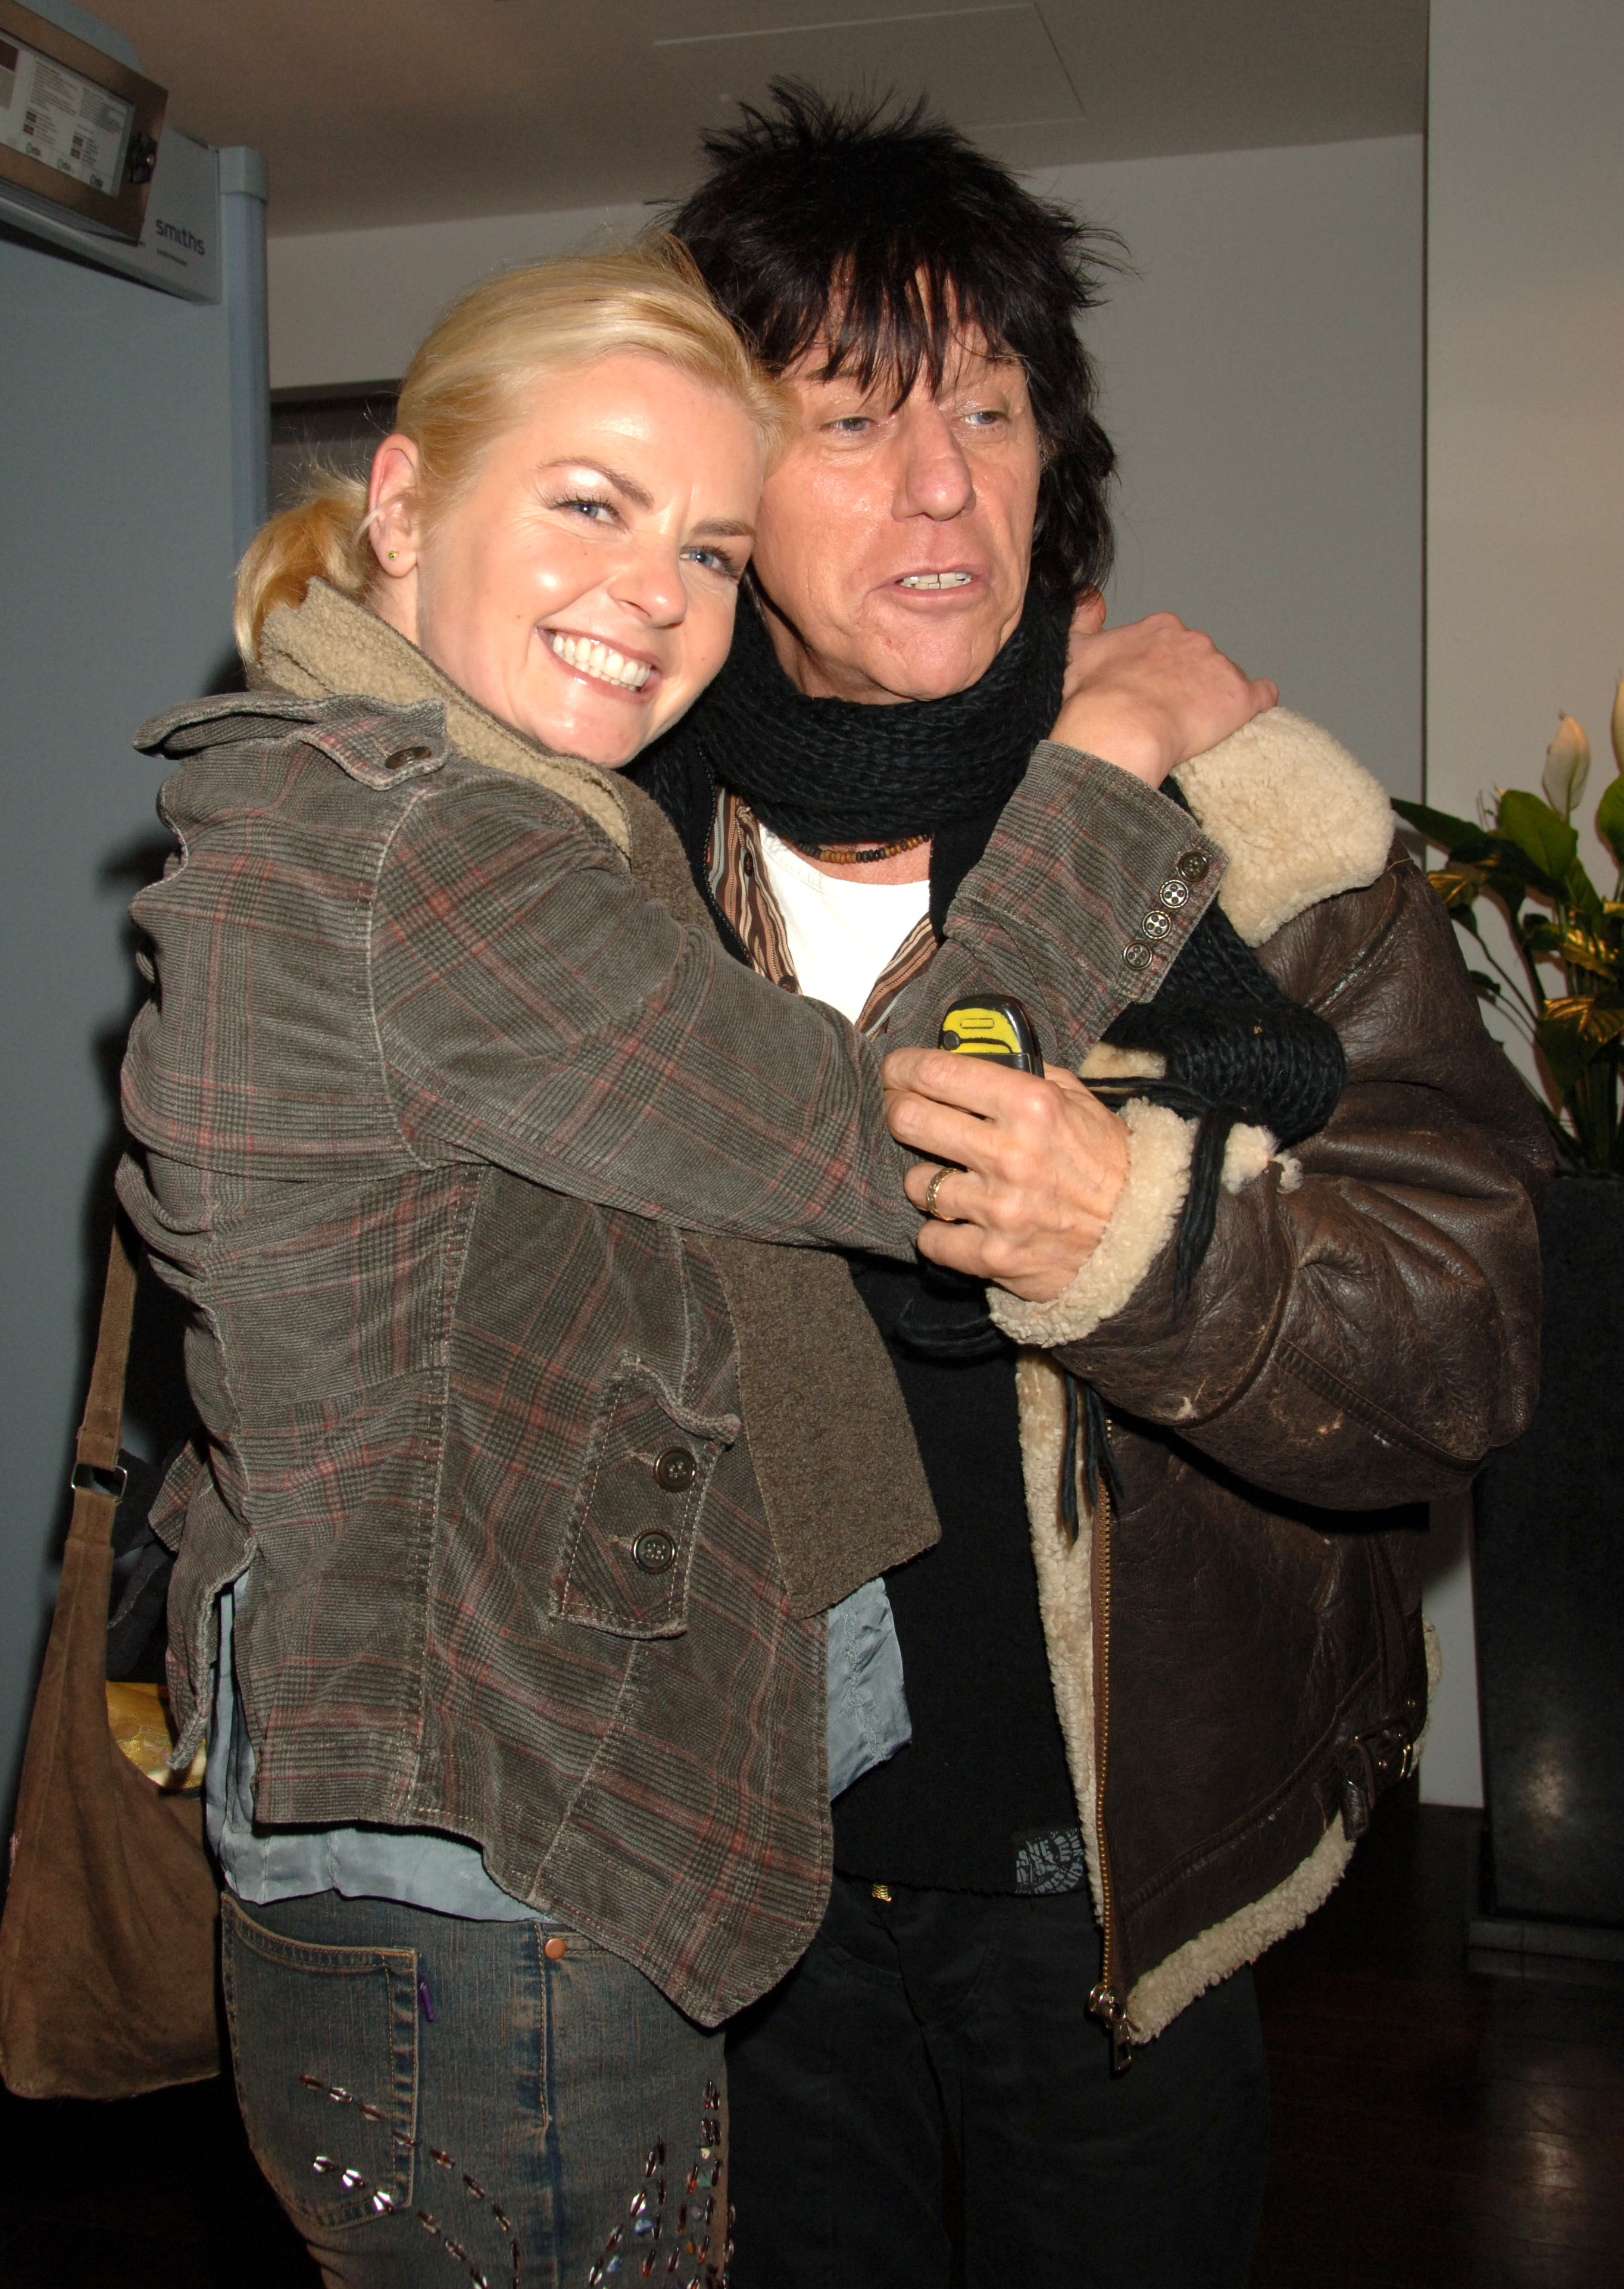 Sandra Cash and Jeff Beck at the Led Zeppelin Concert on December 10, 2007, at The O2 Arena in London, England. | Source: Getty Images